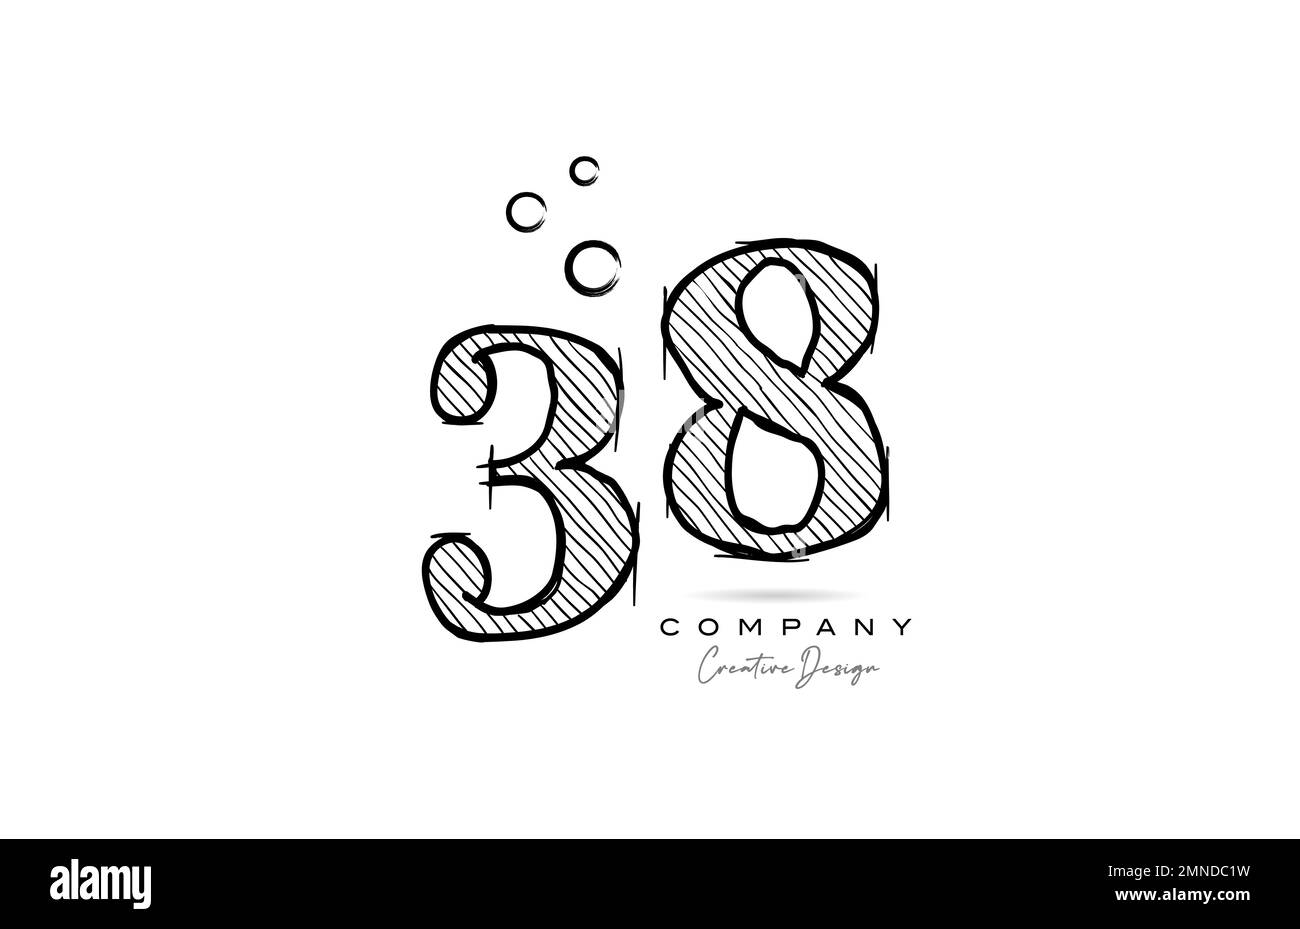 hand drawing number 38 logo icon design for company template or business. Creative logotype in pencil style Stock Vector